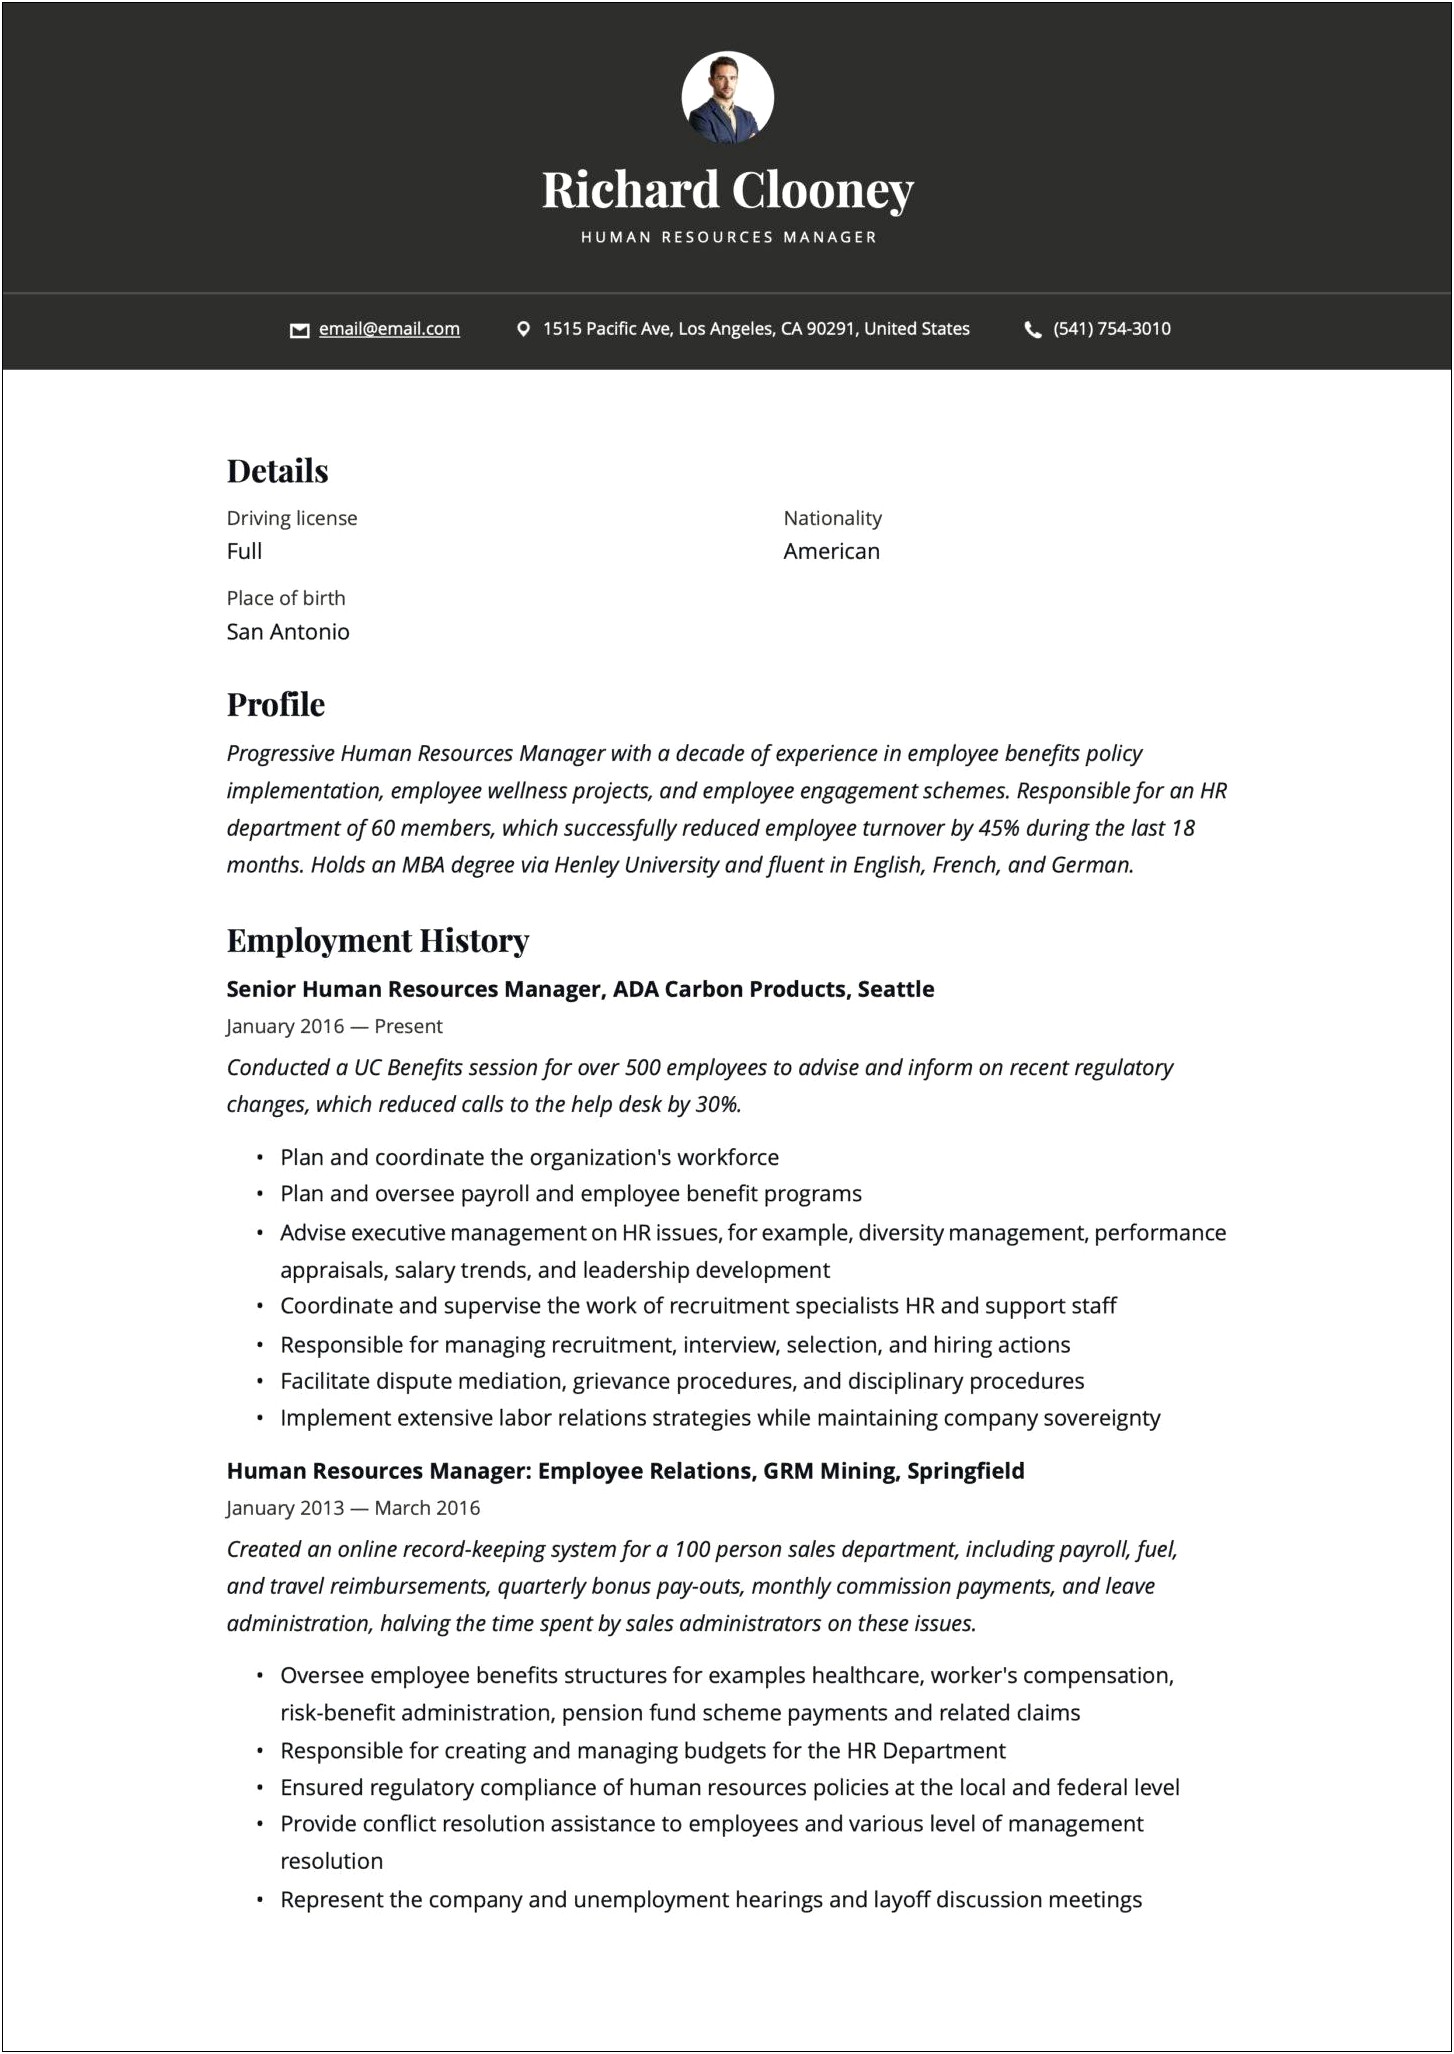 Resume Examples Human Resources Manager